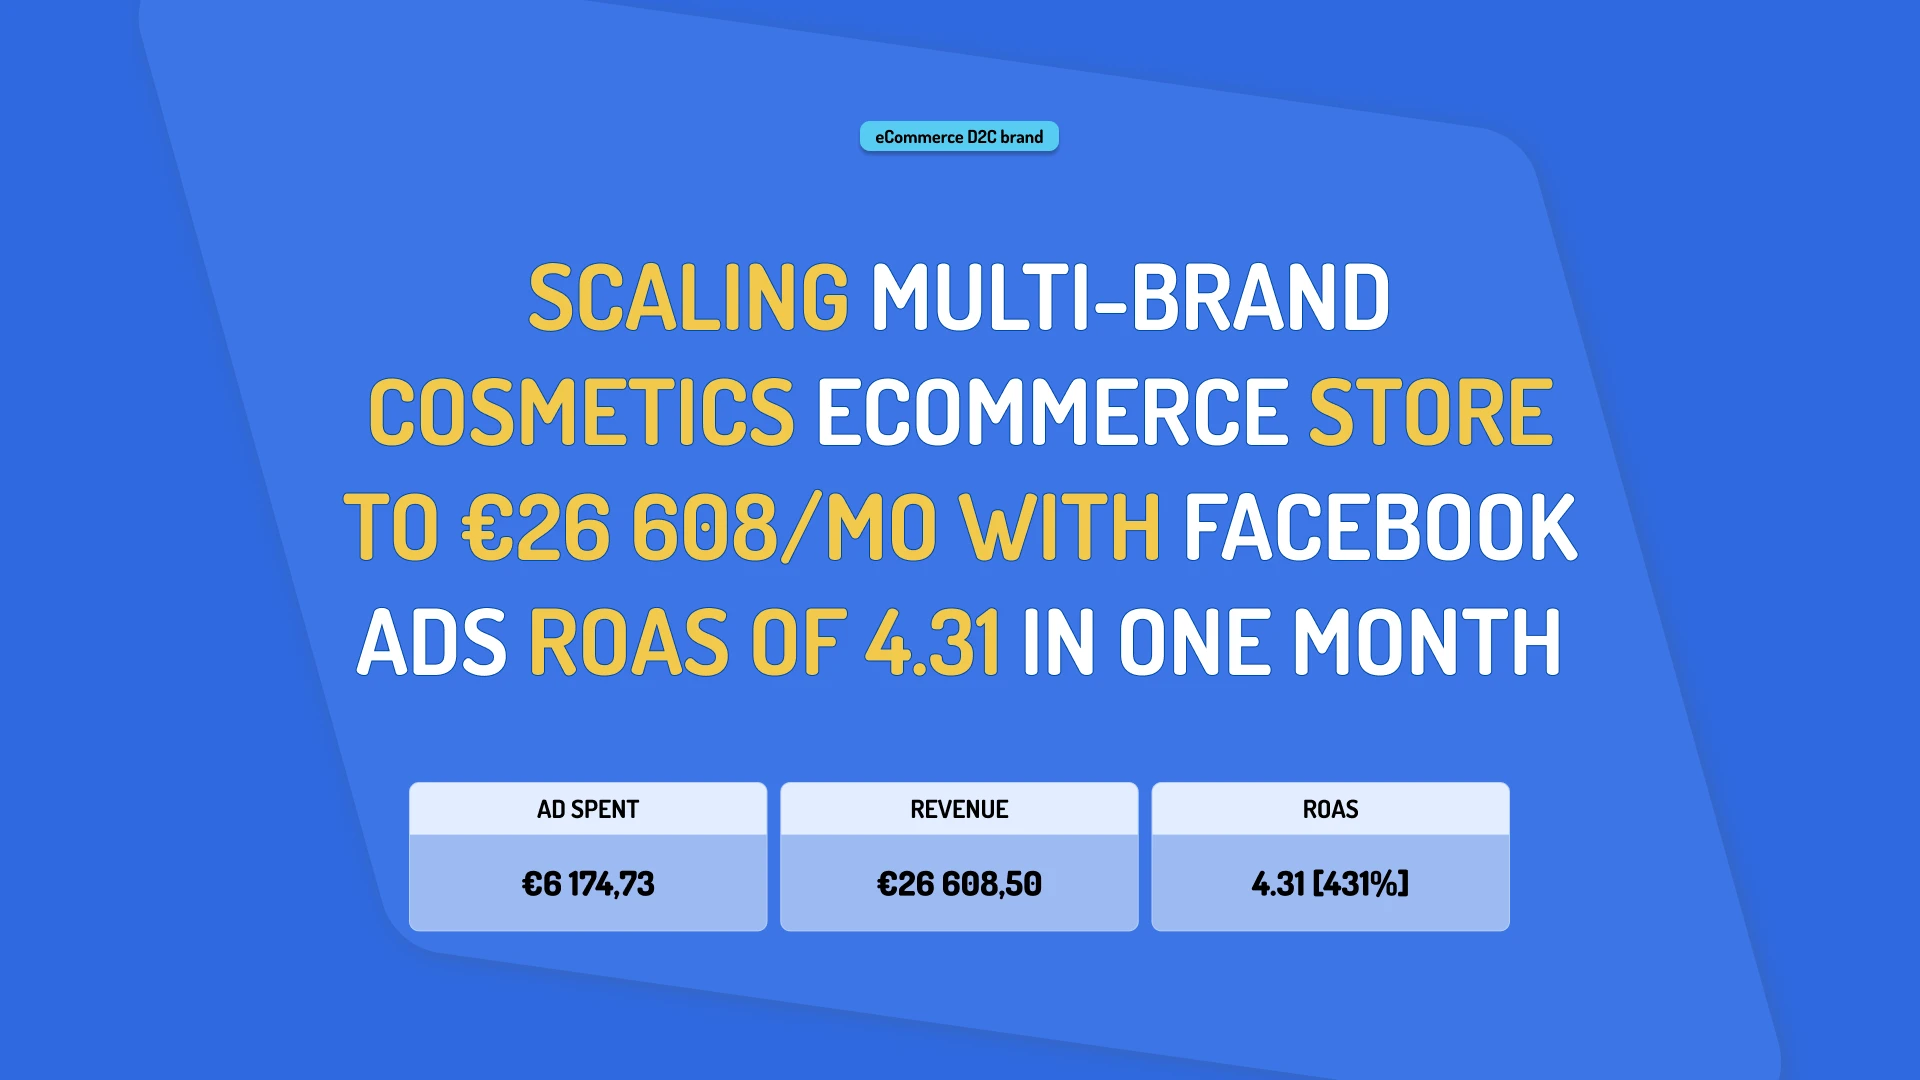 Cosmetics eCommerce Store: €26608/MO with Facebook Ads ROAS of 4.31